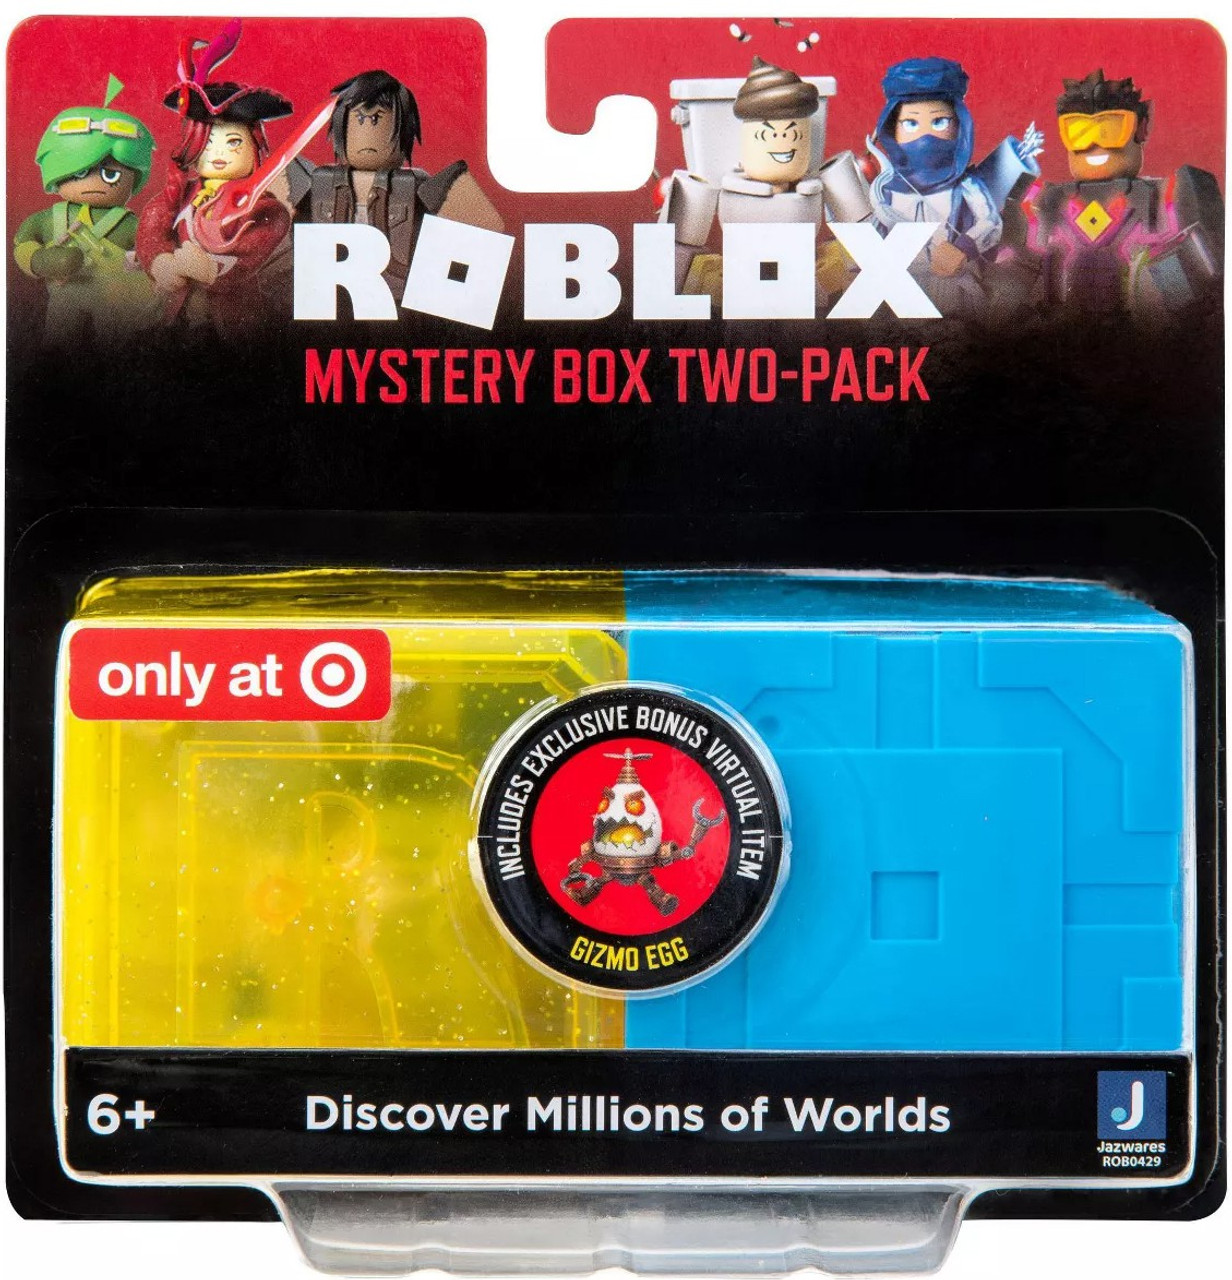 Roblox Series 9 Celebrity Series 7 Exclusive Mystery 2 Pack Easter Set Bonus Gizmo Egg Virtual Item Code Included Jazwares Toywiz - roblox exclusive virtual items